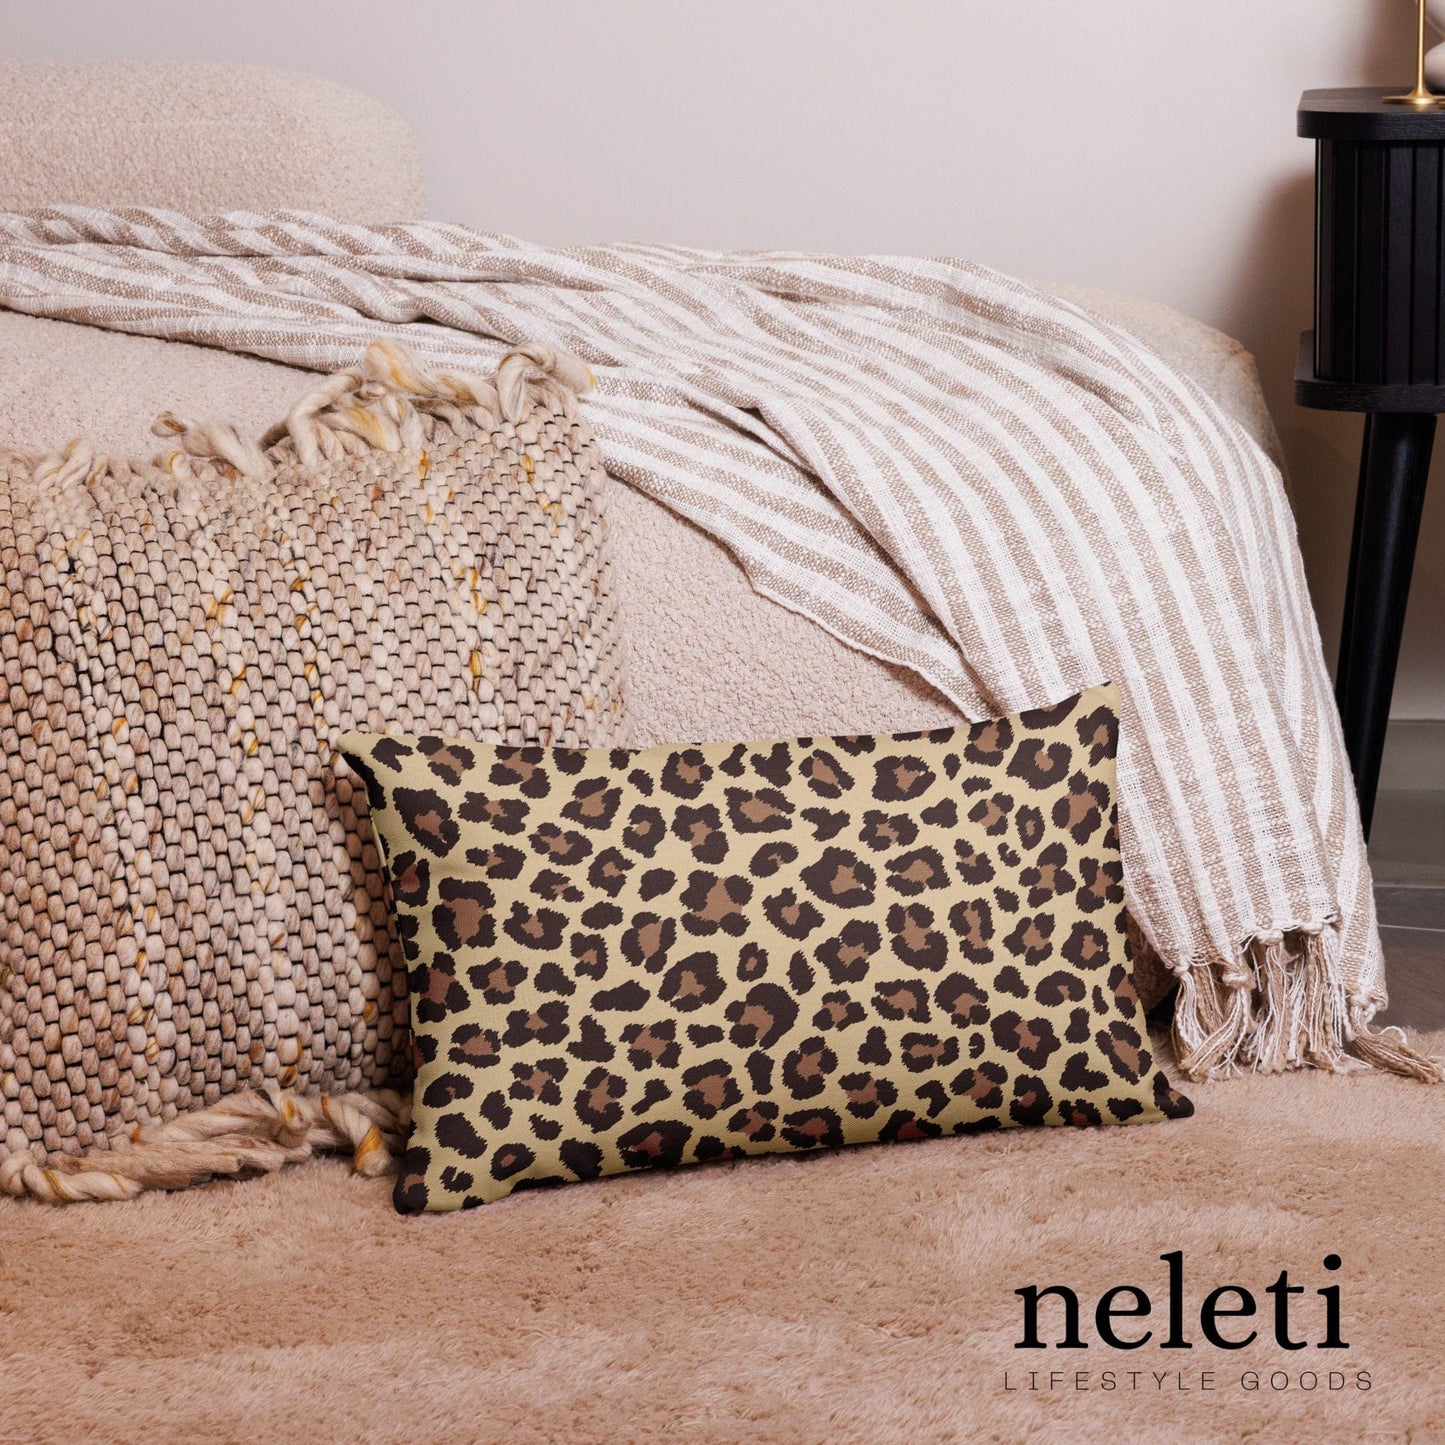 neleti.com-leopard-print-throw-pillow-in-size-20x12-inches